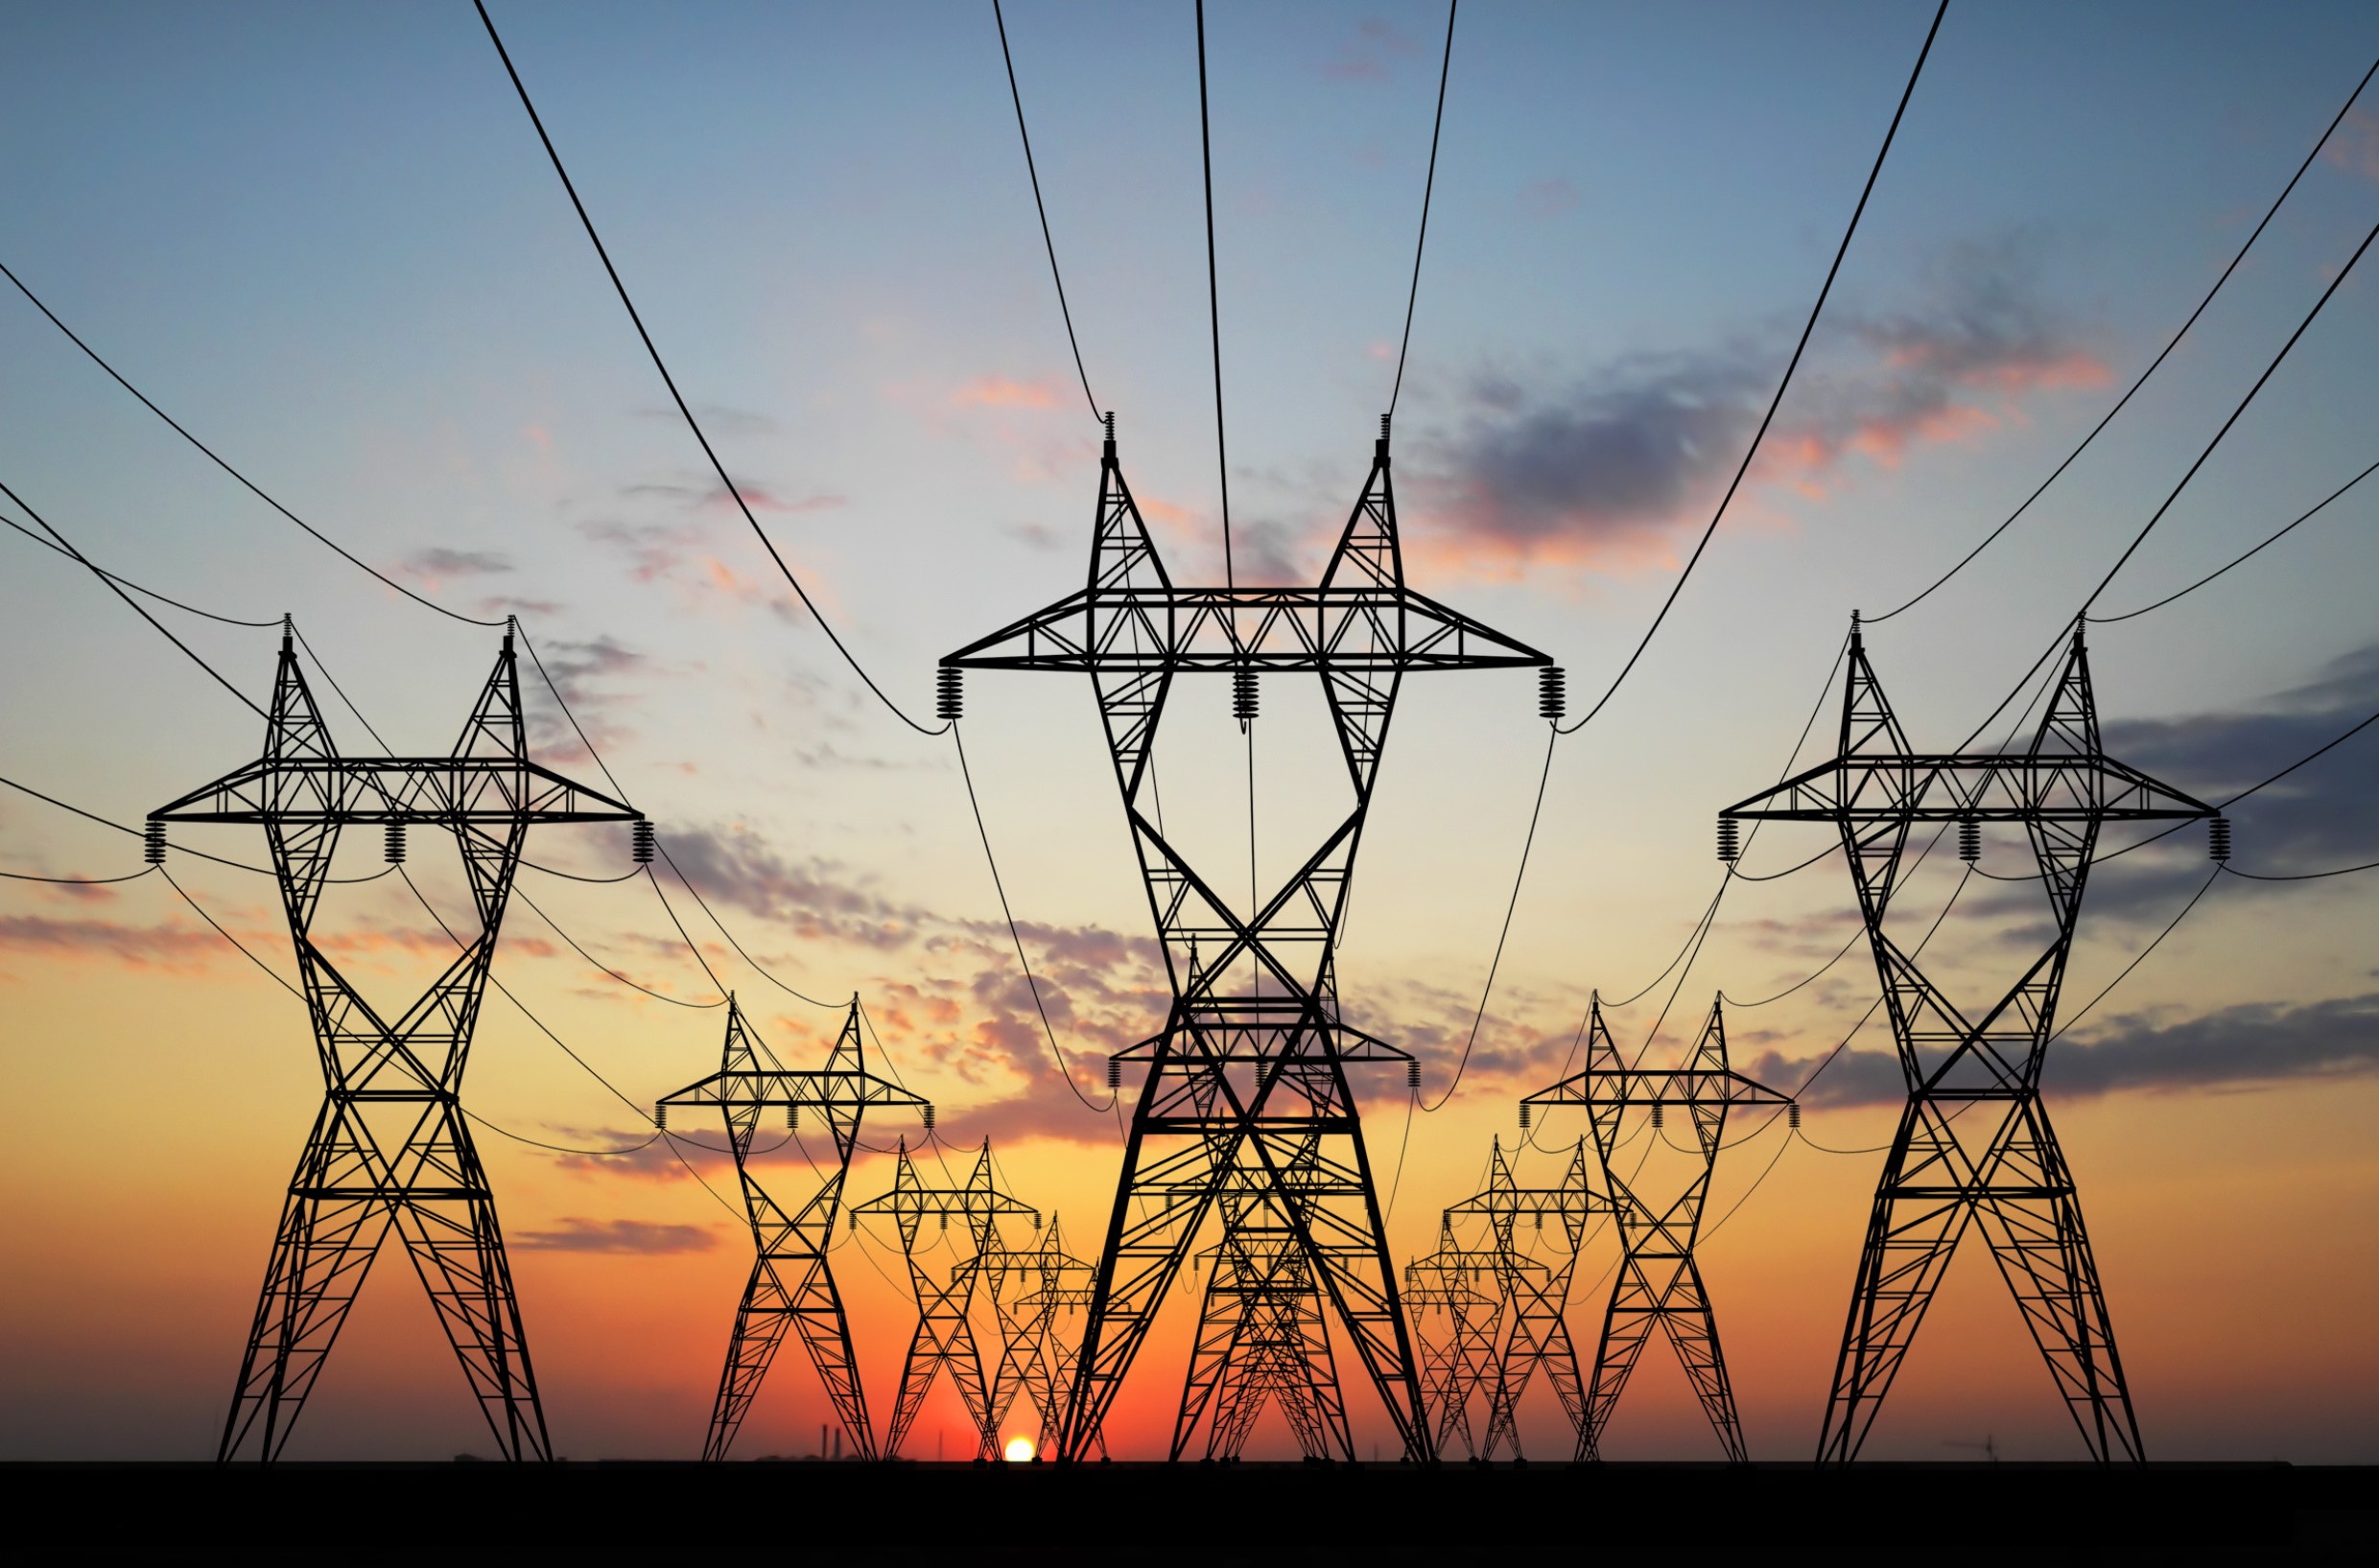 transmission lines silhouetted against a sunset demand for power